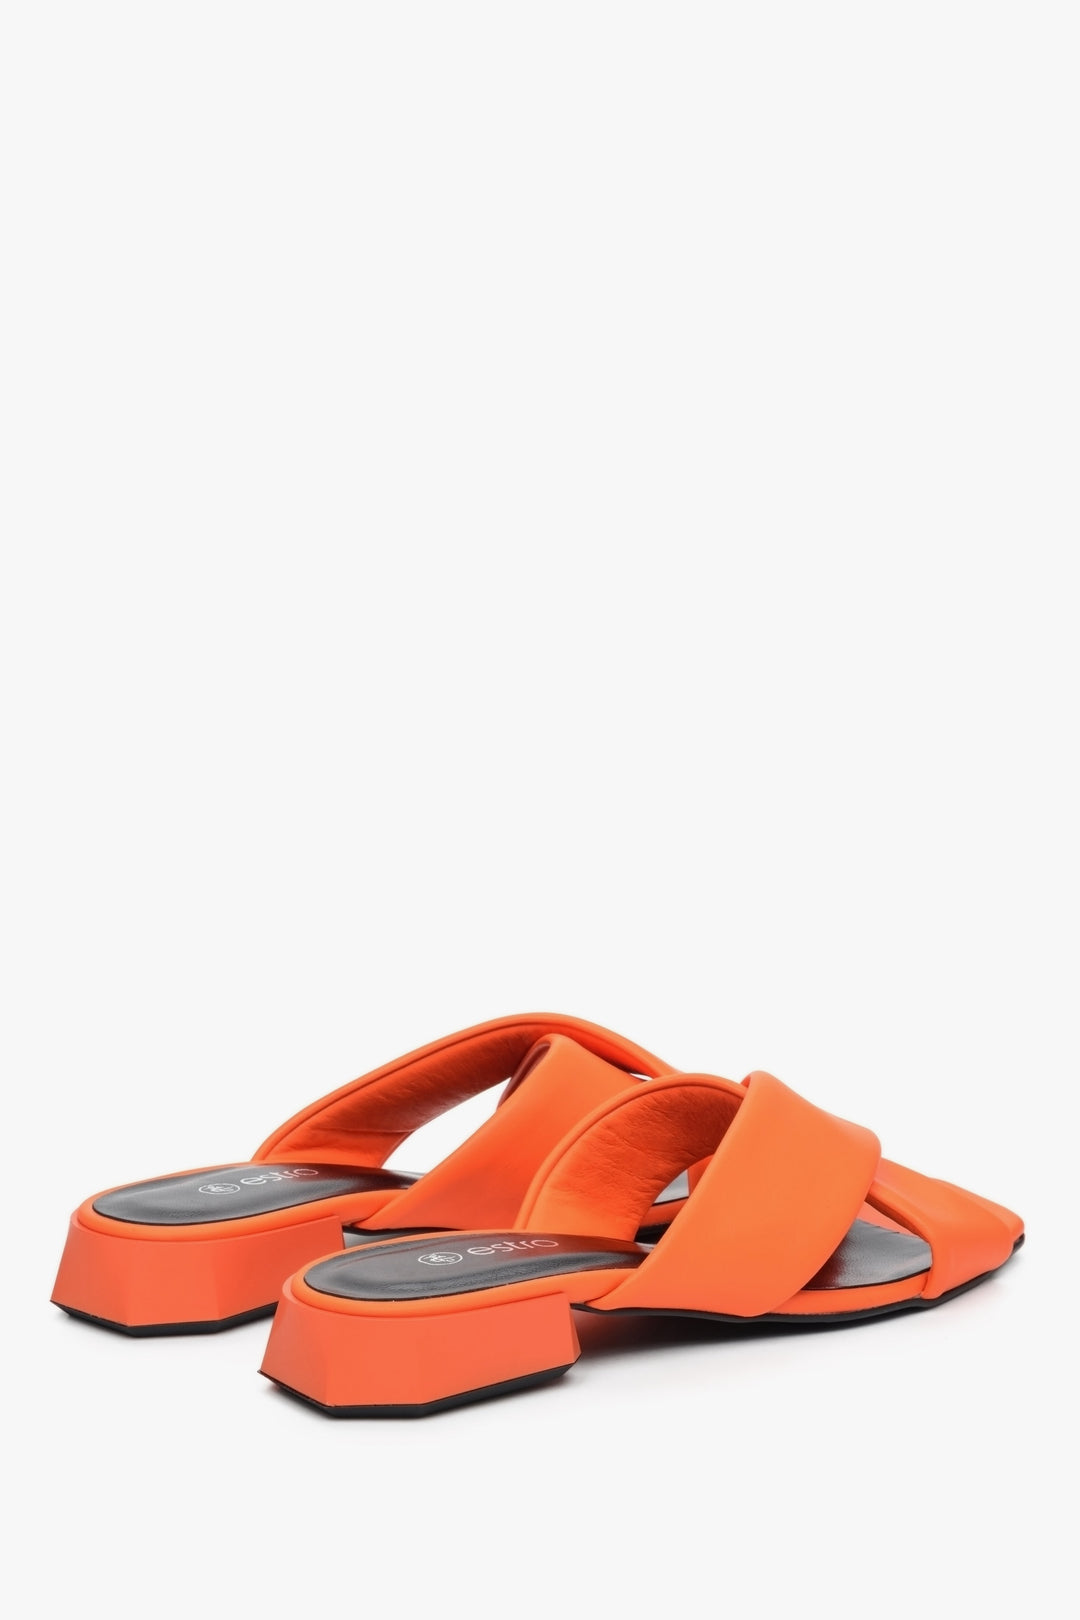 Women's low-heeled leather mules in orange - close-up on back tip of the shoe.